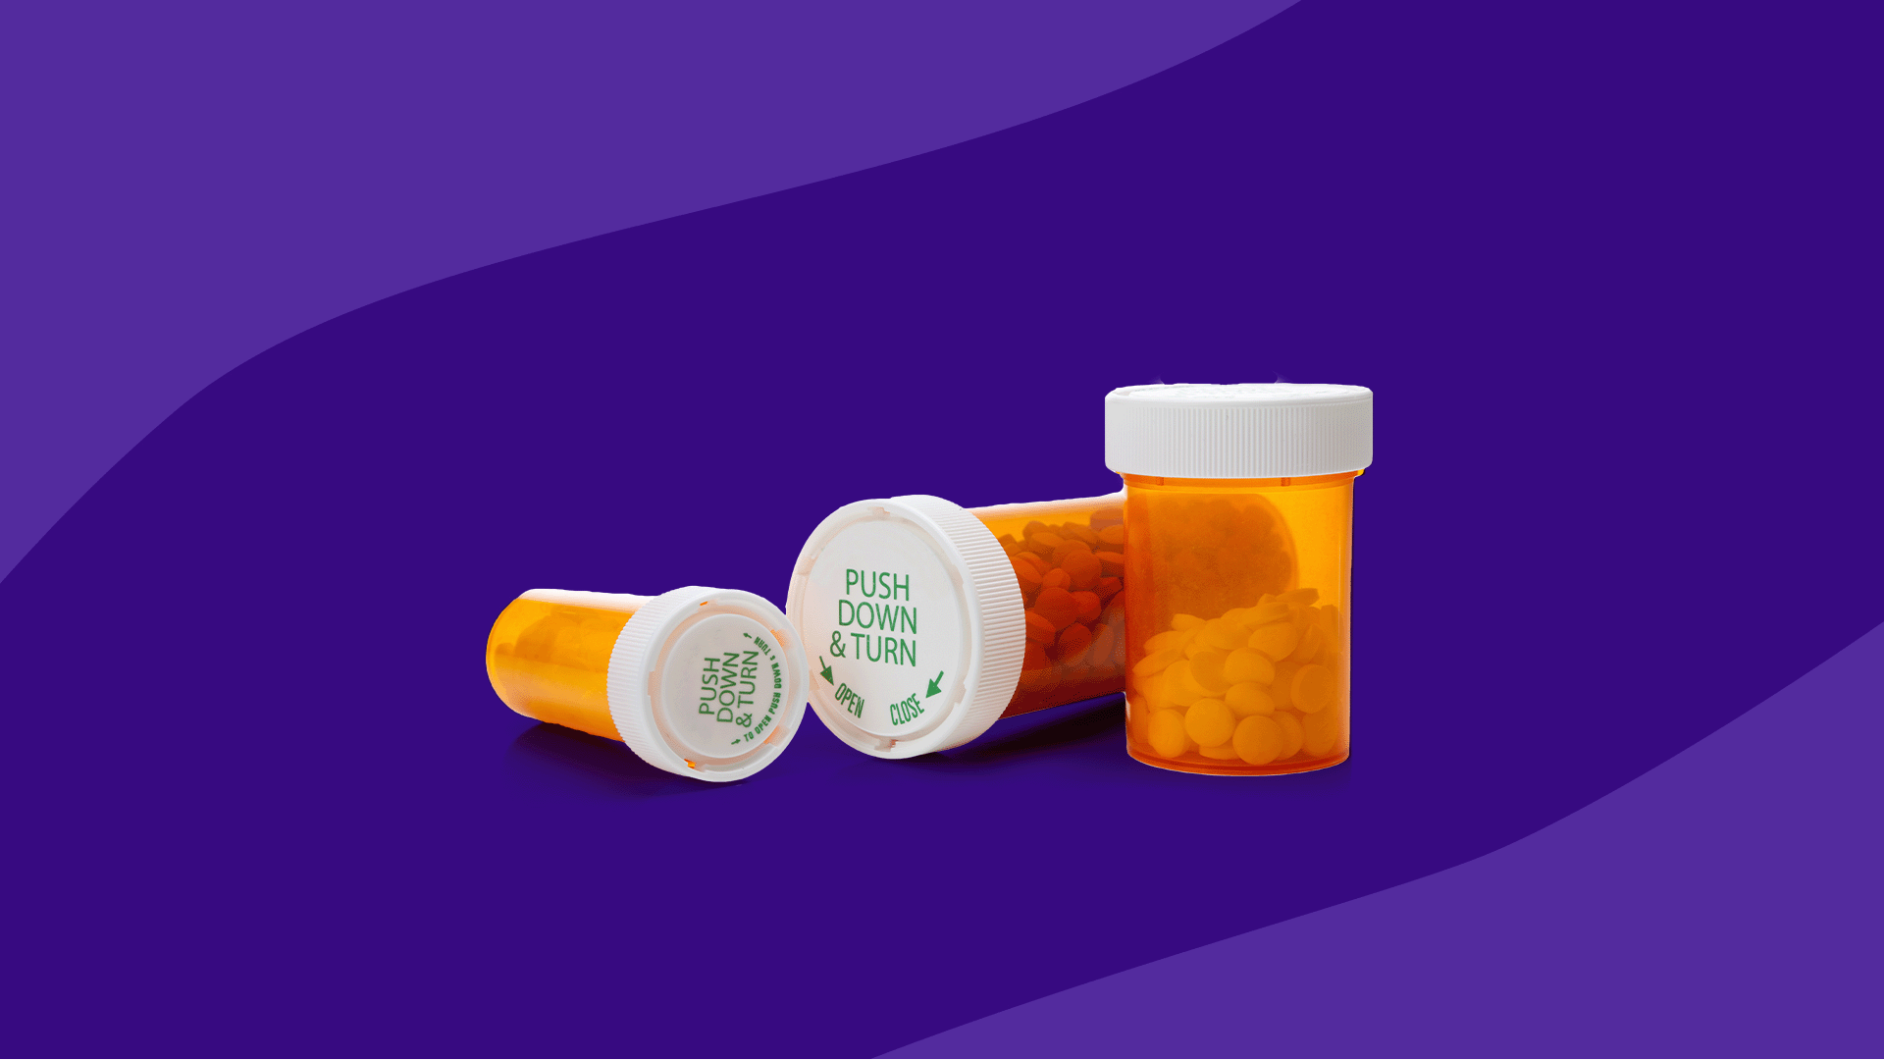 Rx pill bottles: How much does phenazopyridine HCl cost without insurance